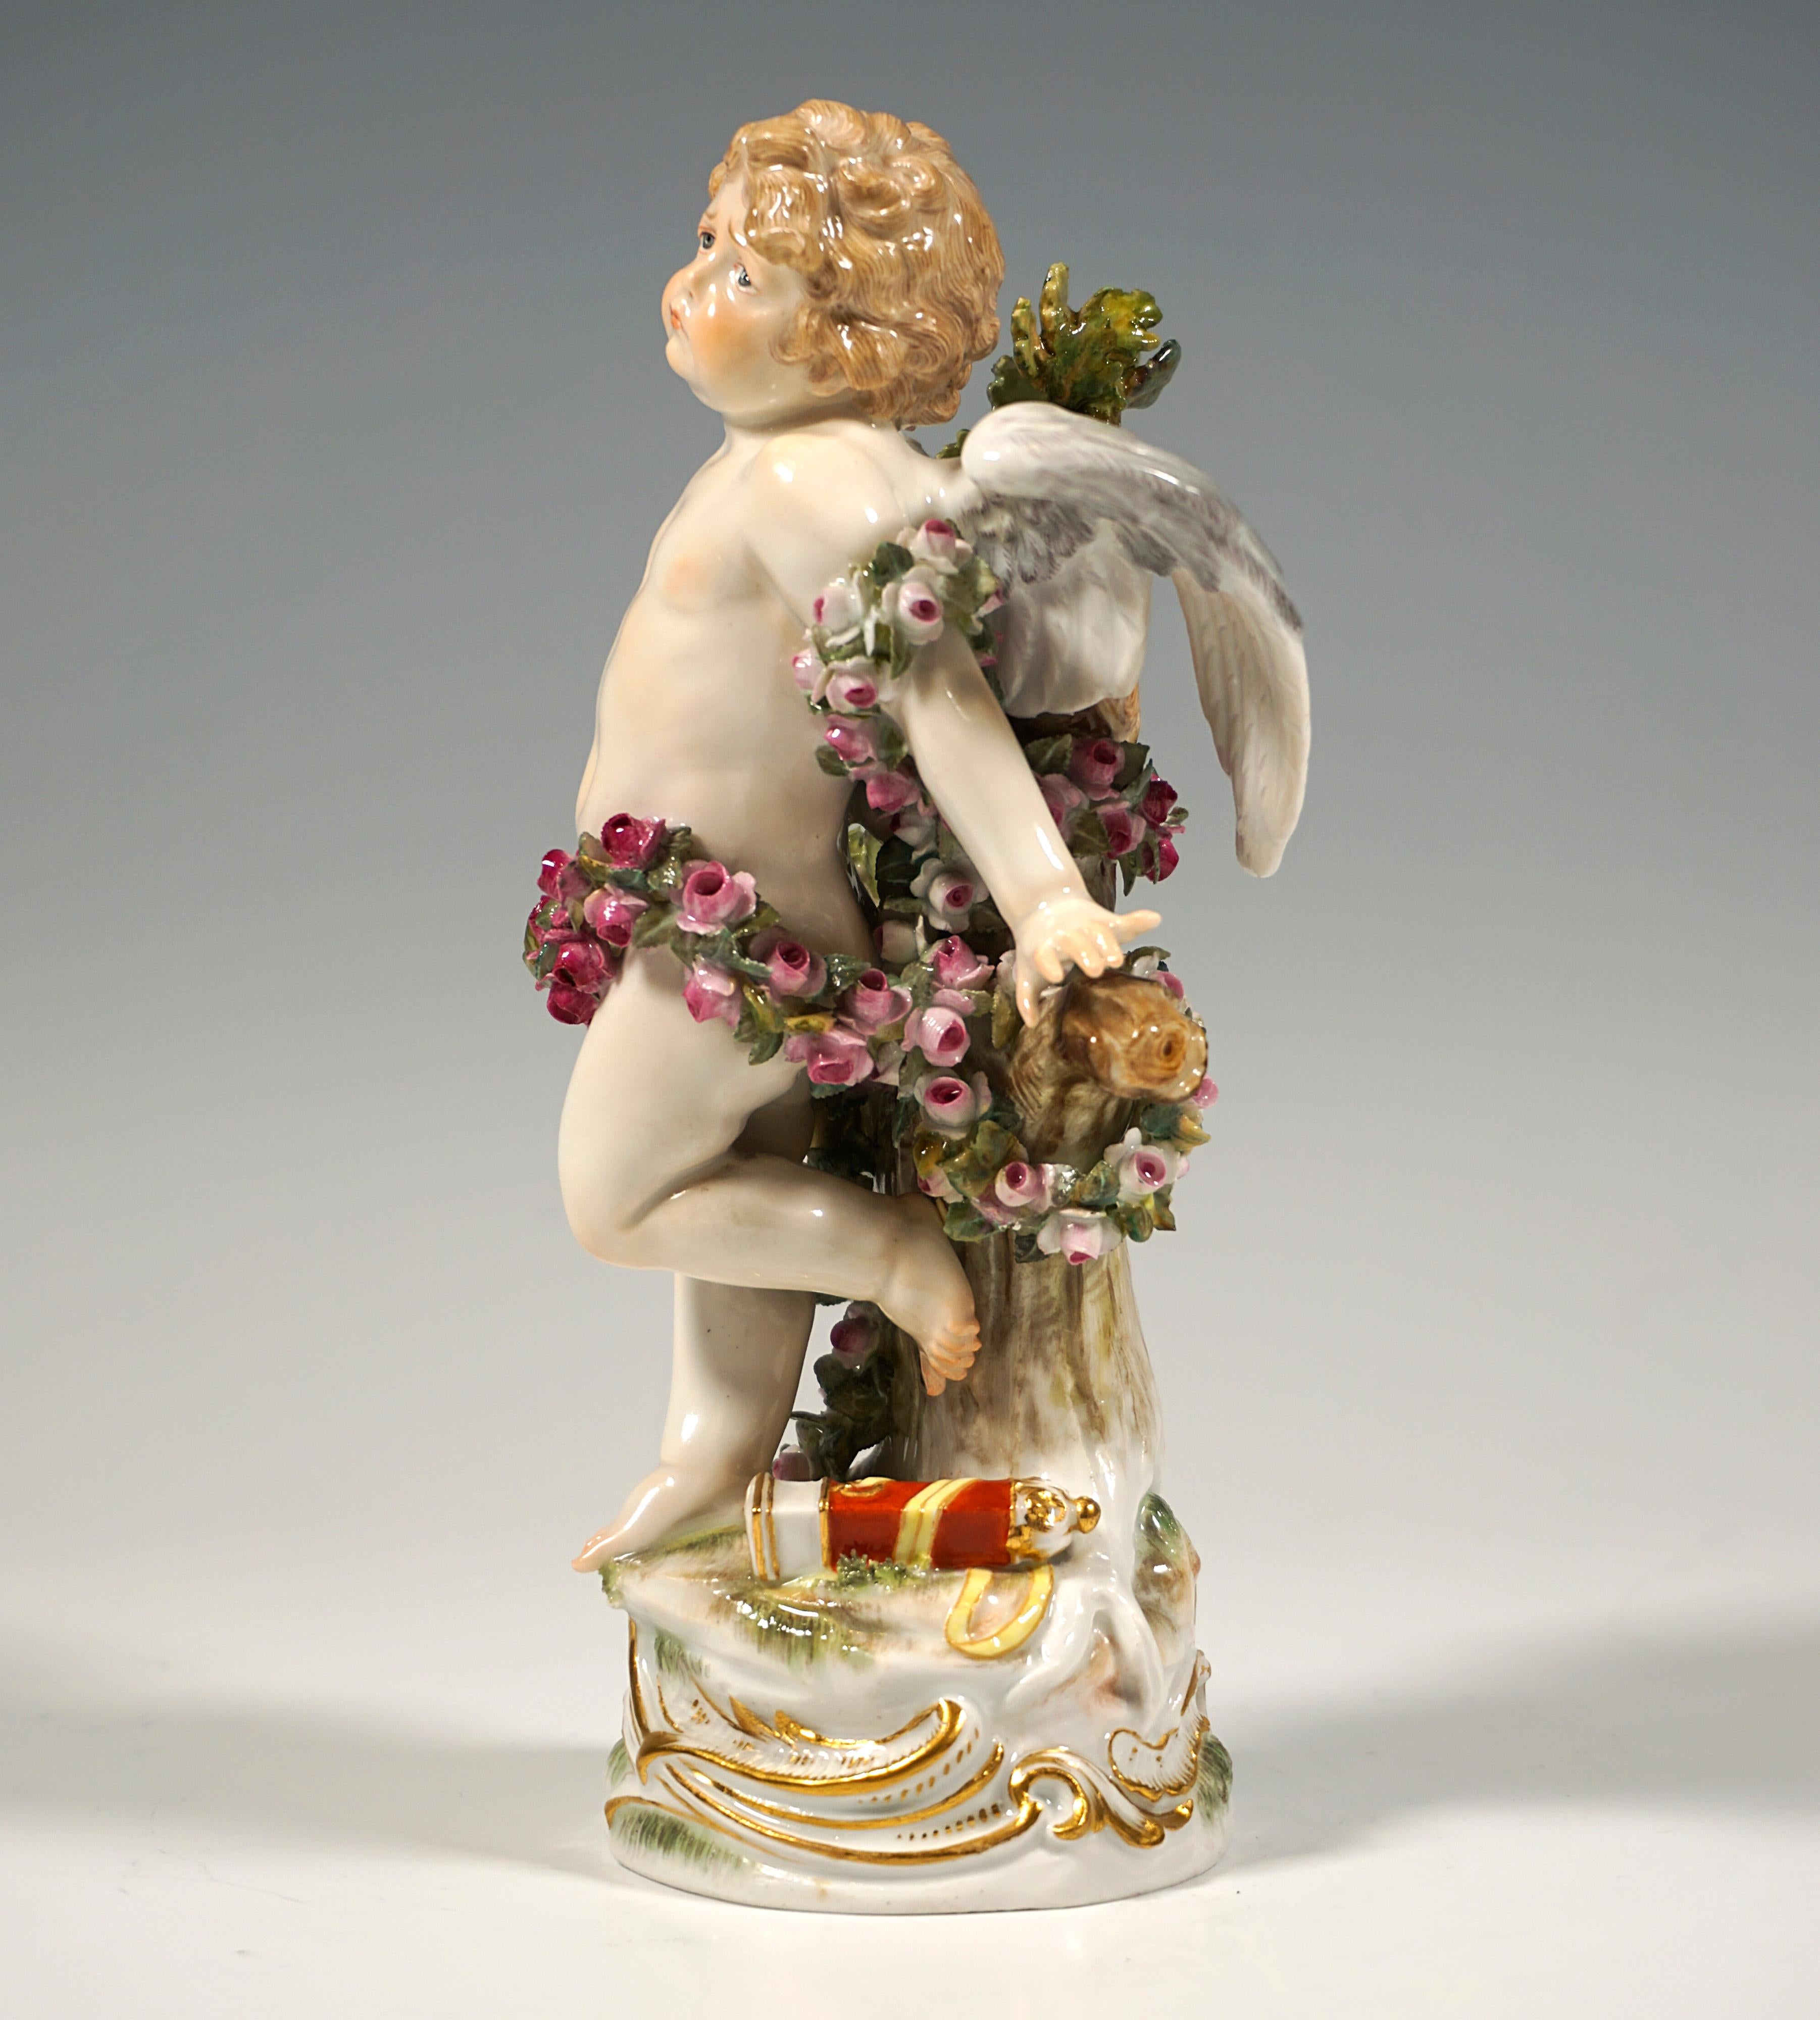 Excellen Art Nouveau porcelain figurine by Paul Helmig:
Winged cupid boy with a suffering expression tied to a tree with a long garland of roses, an empty quiver at his feet.
On high, round natural base with lateral, gold heightened rocaille